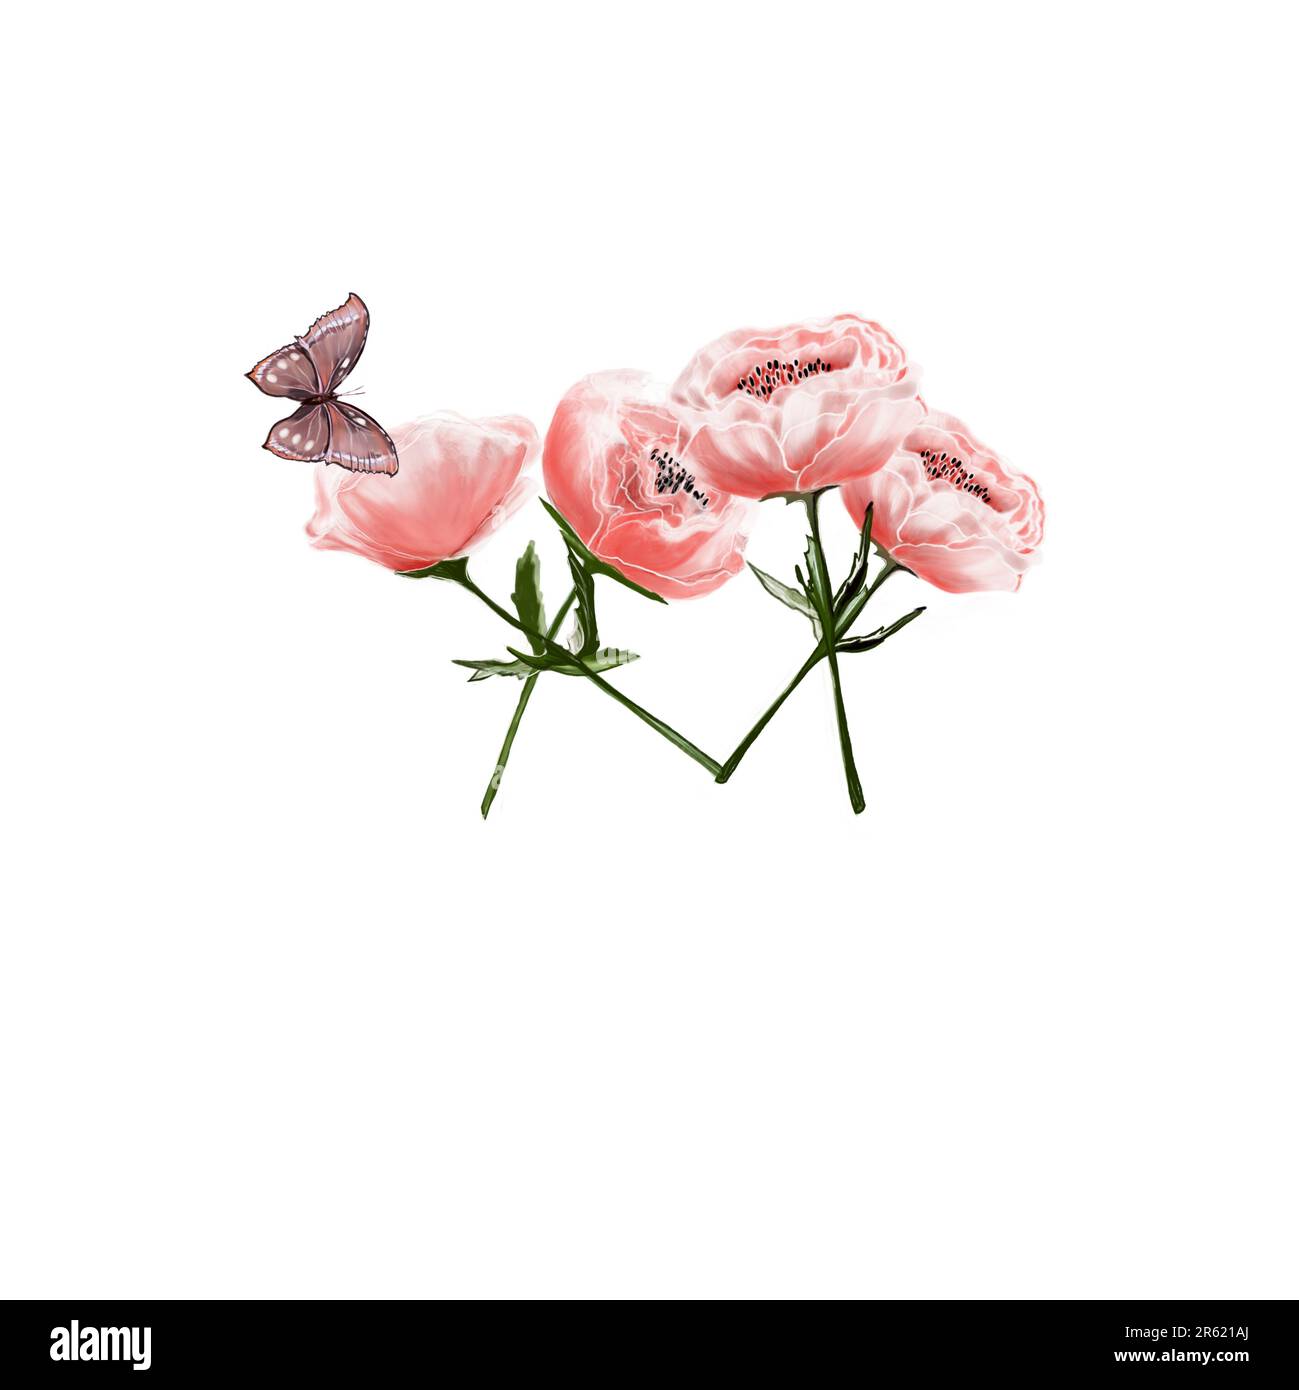 pink flowers, poppies, roses, with a butterfly delicate of detailed watercolor, hand painted wildflowers on white background. Spring and summer bloomi Stock Photo